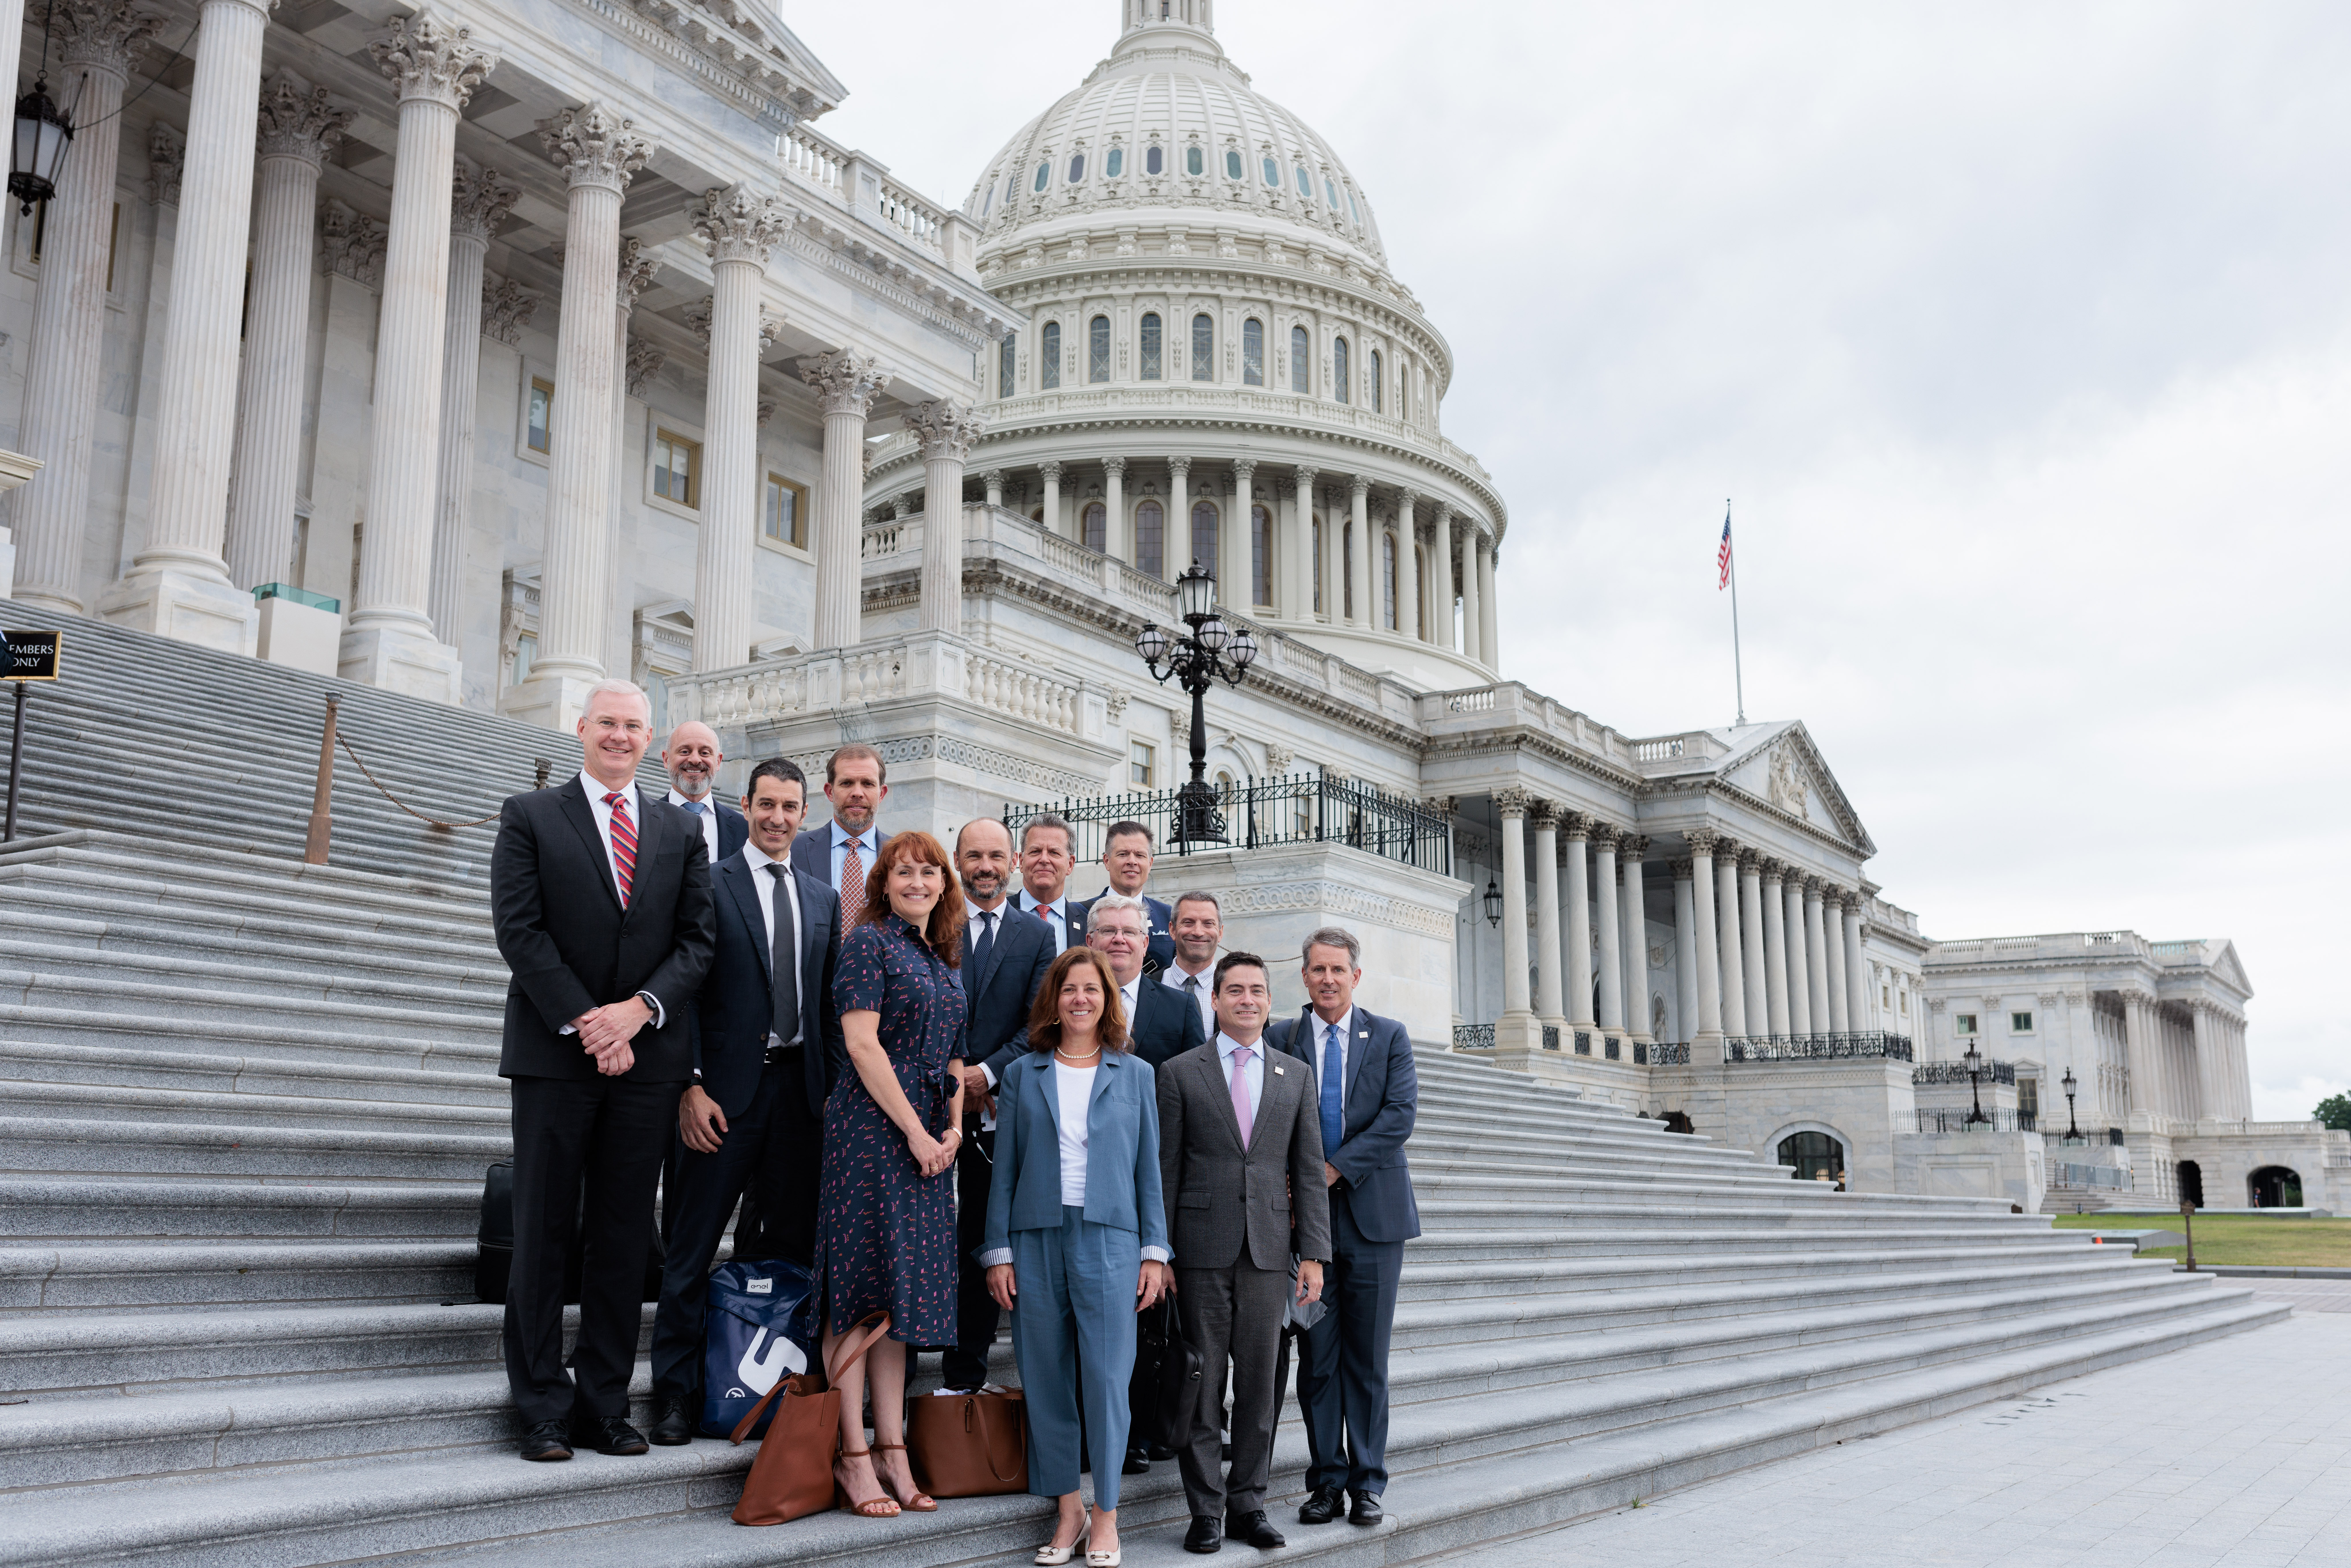 A group of people in formal dress pose for a picture on the Capitol steps.